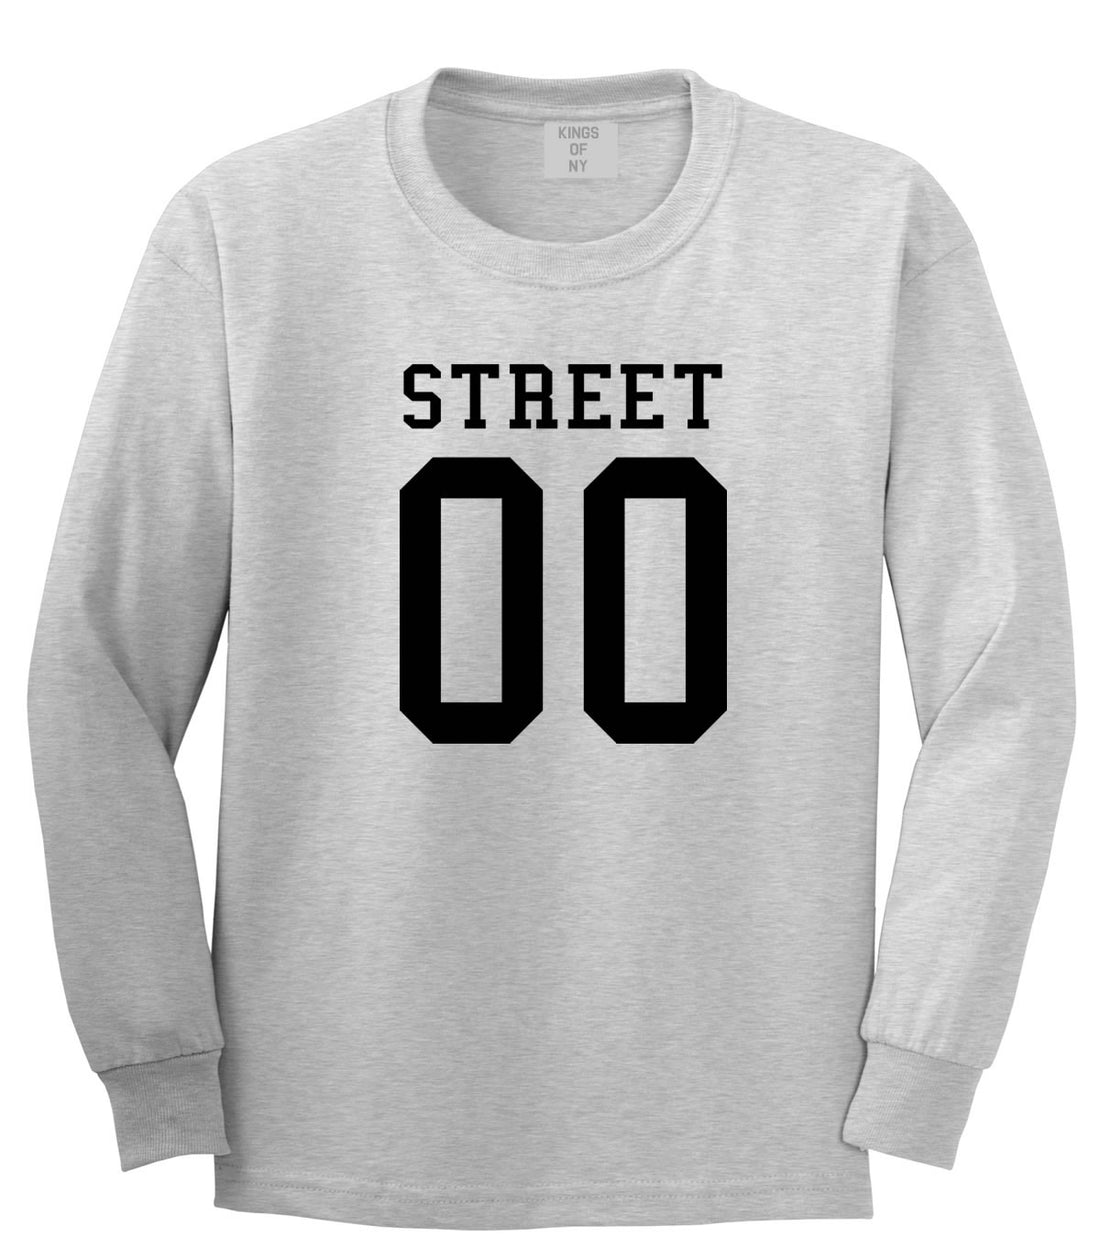 Street Team 00 Jersey Long Sleeve T-Shirt in Grey By Kings Of NY